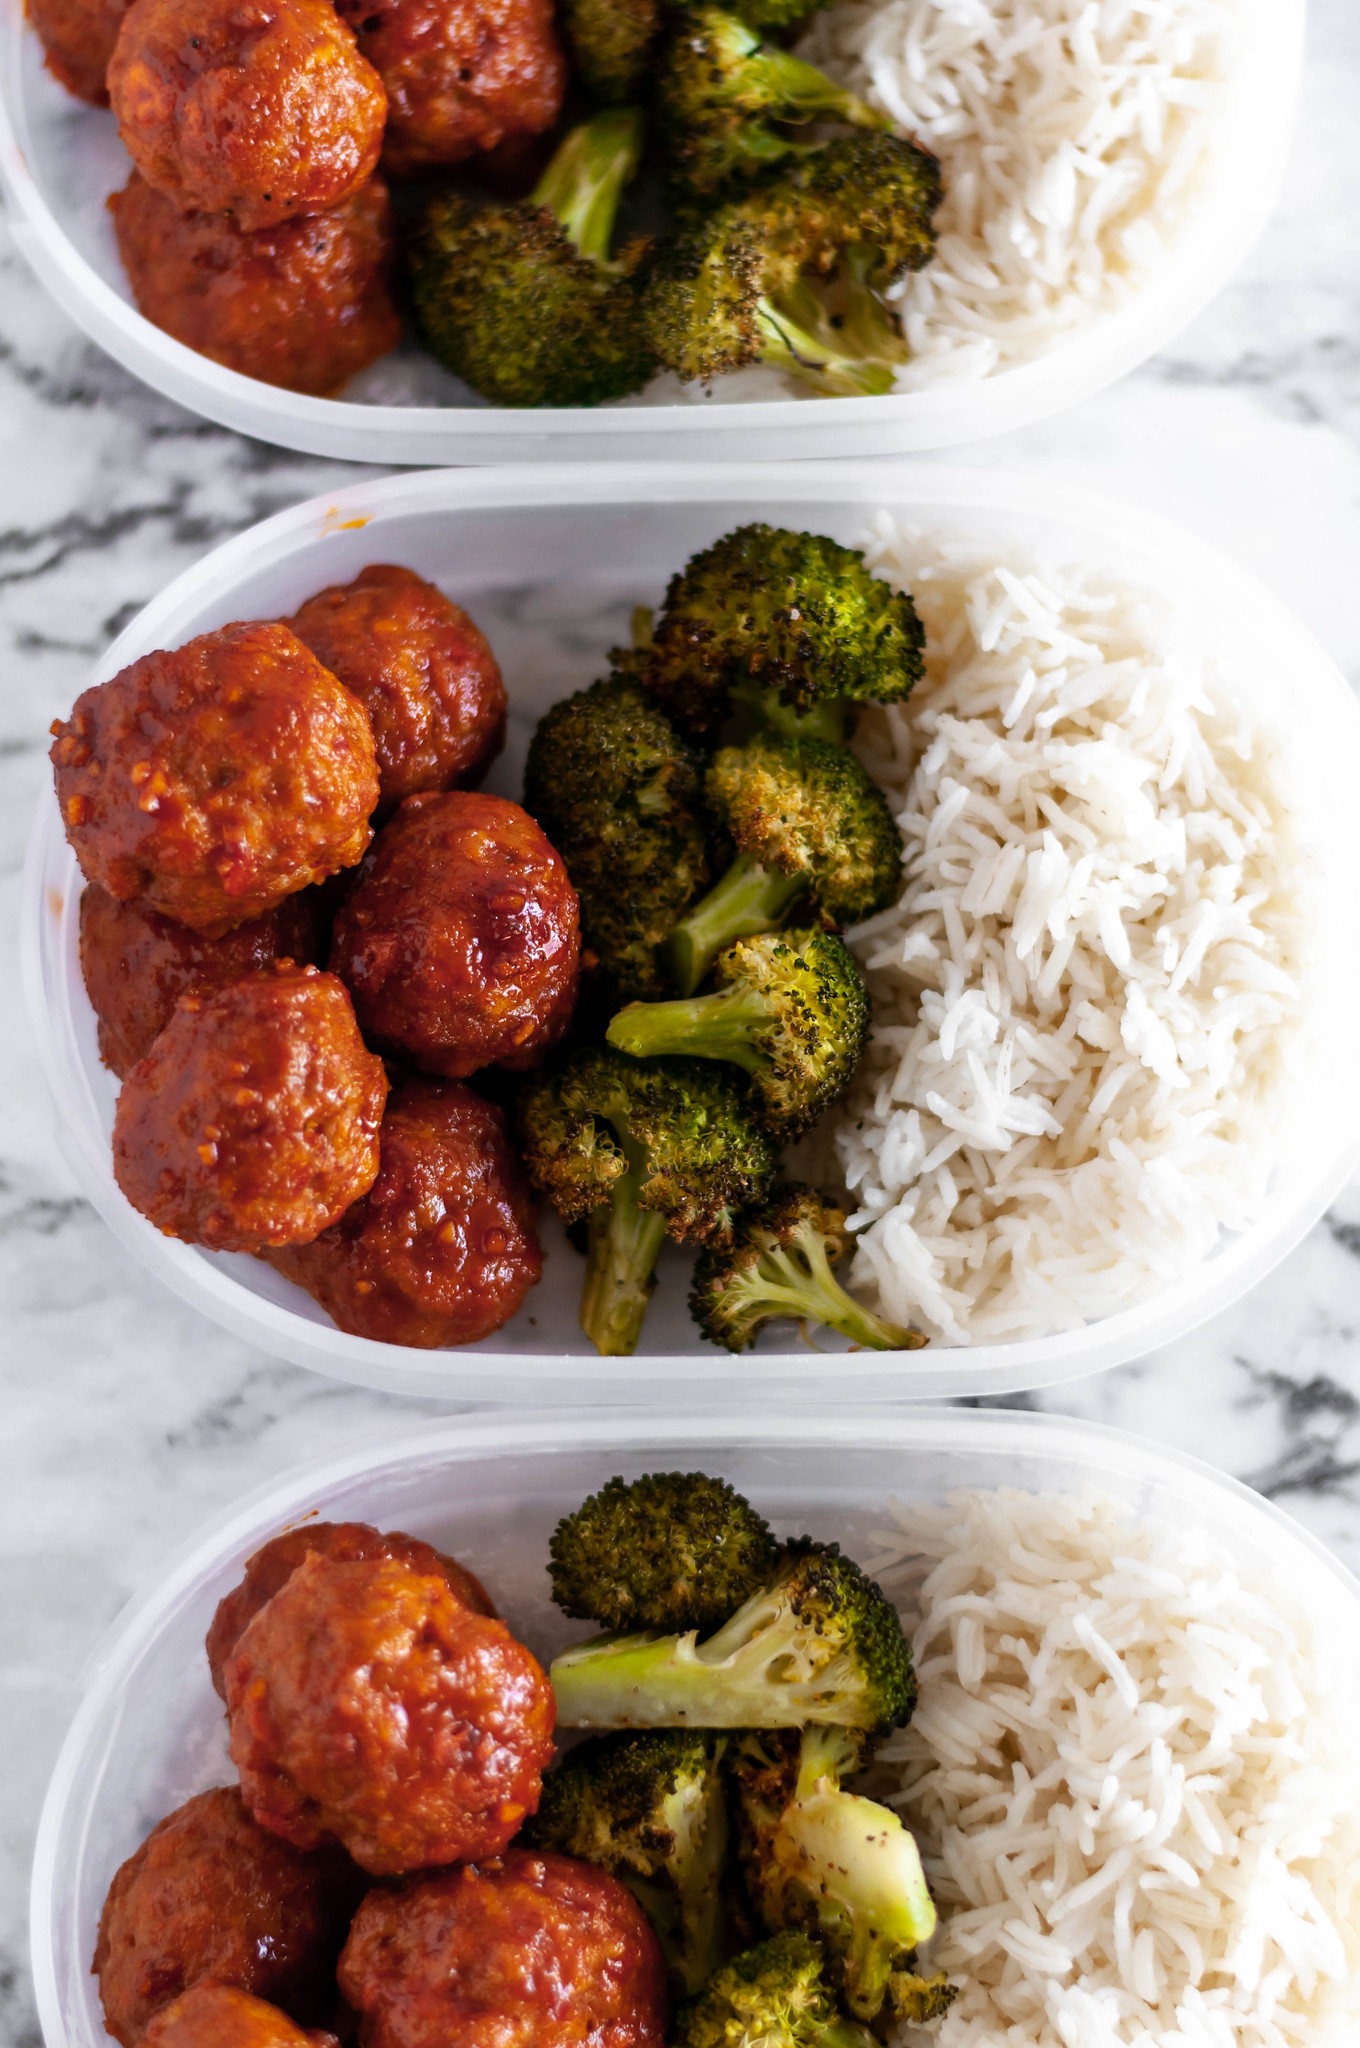 Korean Meatball Meal Prep makes a delicious lunch throughout the week. Baked on a sheet pan along with broccoli. Spicy and so flavorful.